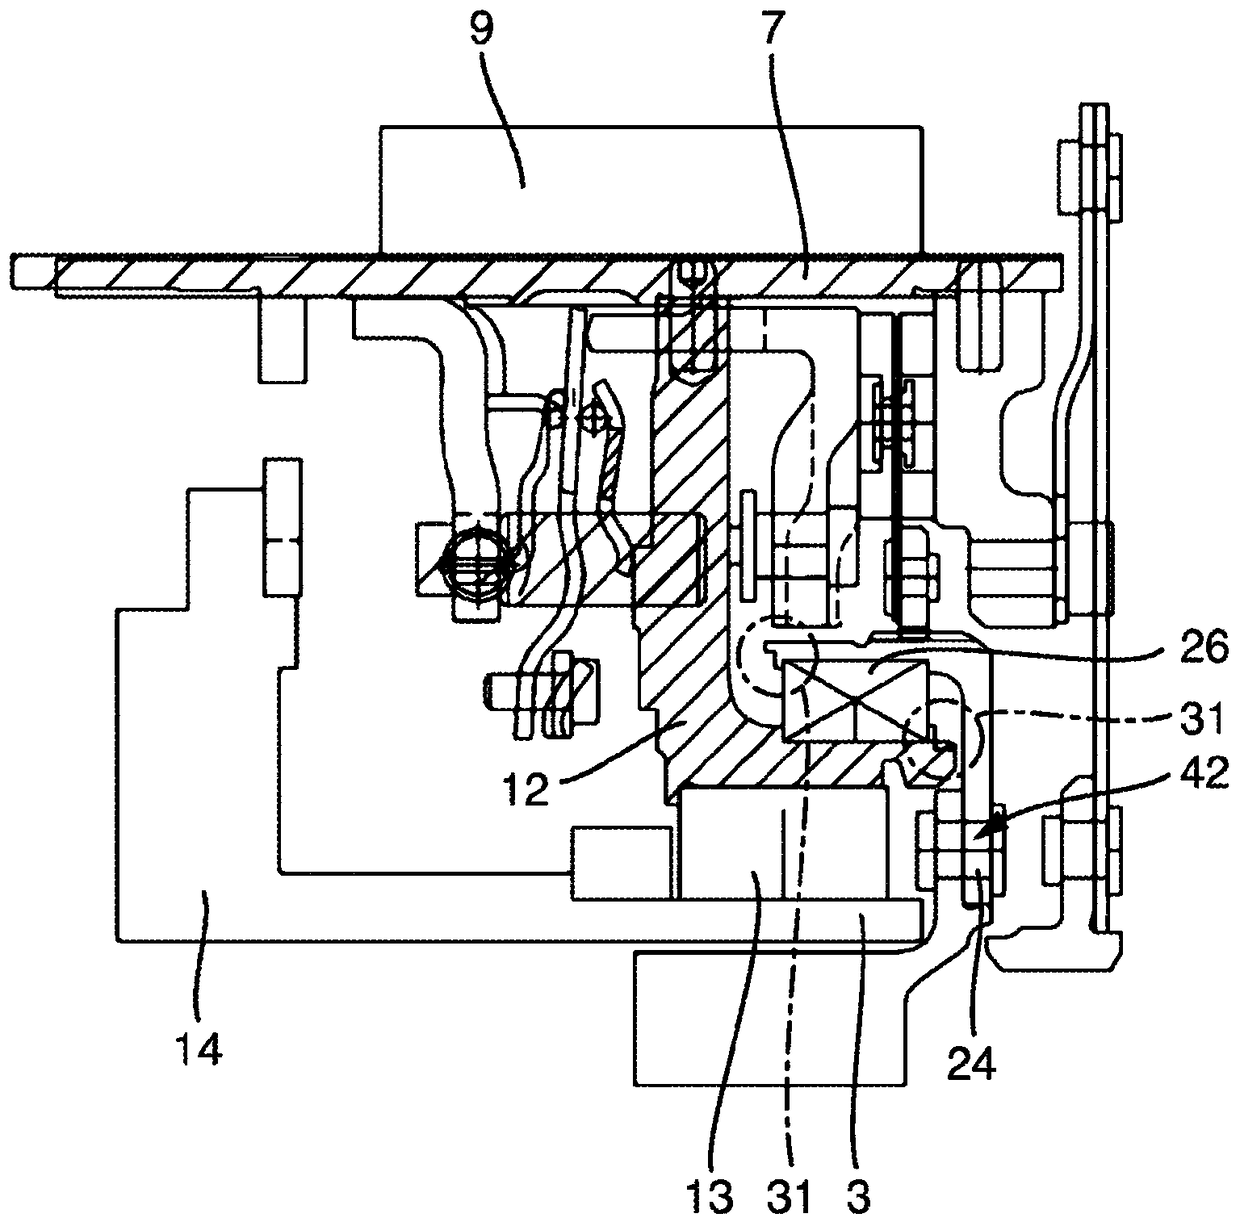 Mounting device for countershaft in the separating clutch of the hybrid module